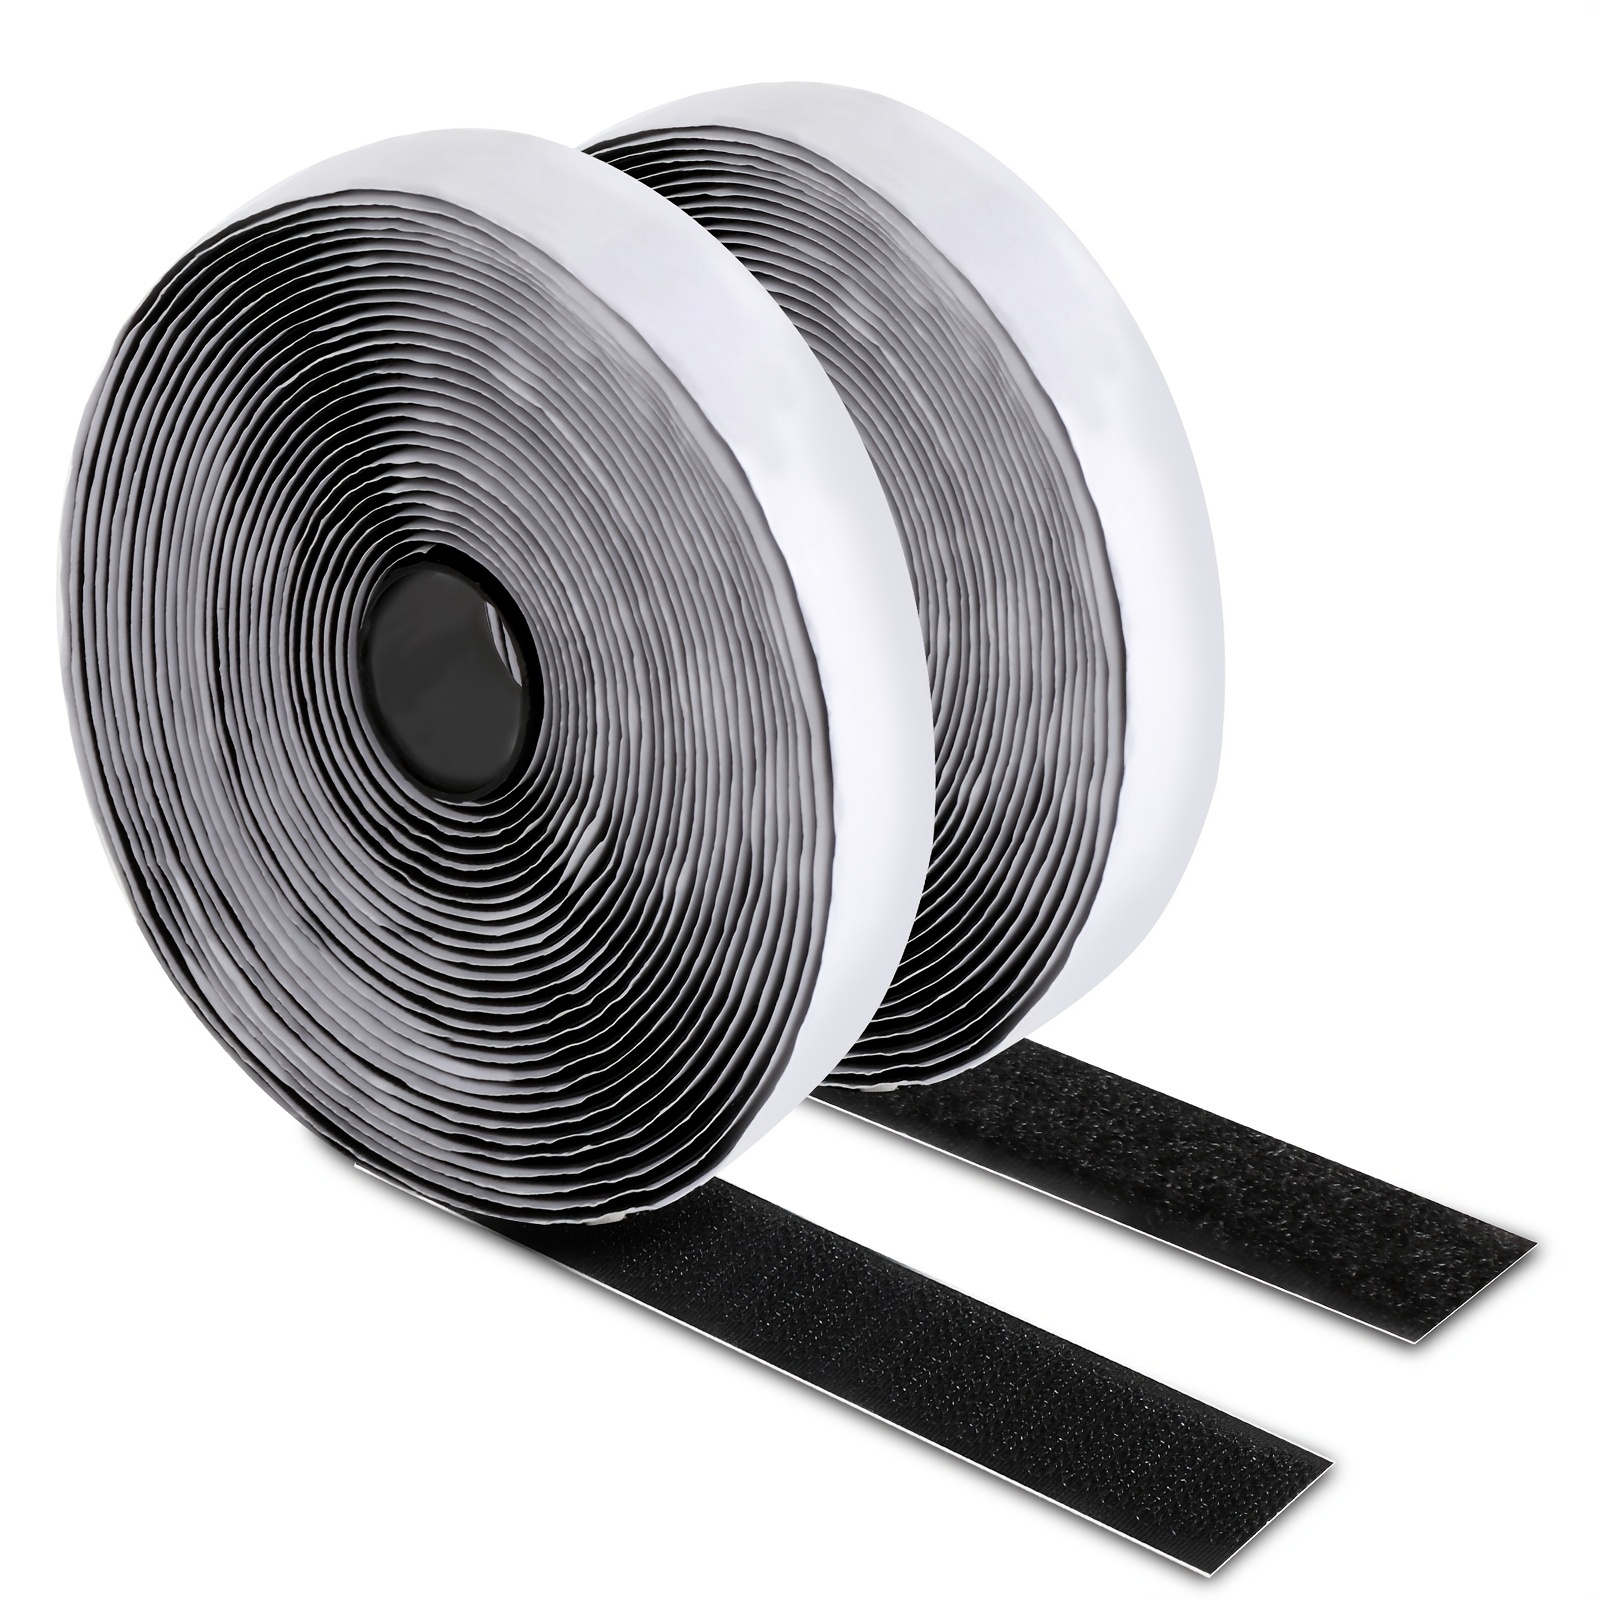 12 Sets 2x4 inch Hook and Loop Strips with Adhesive, Industrial Strength Heavy Duty Sticky Back Fastener Tape for Fabric. Double Sided Self Adhesive